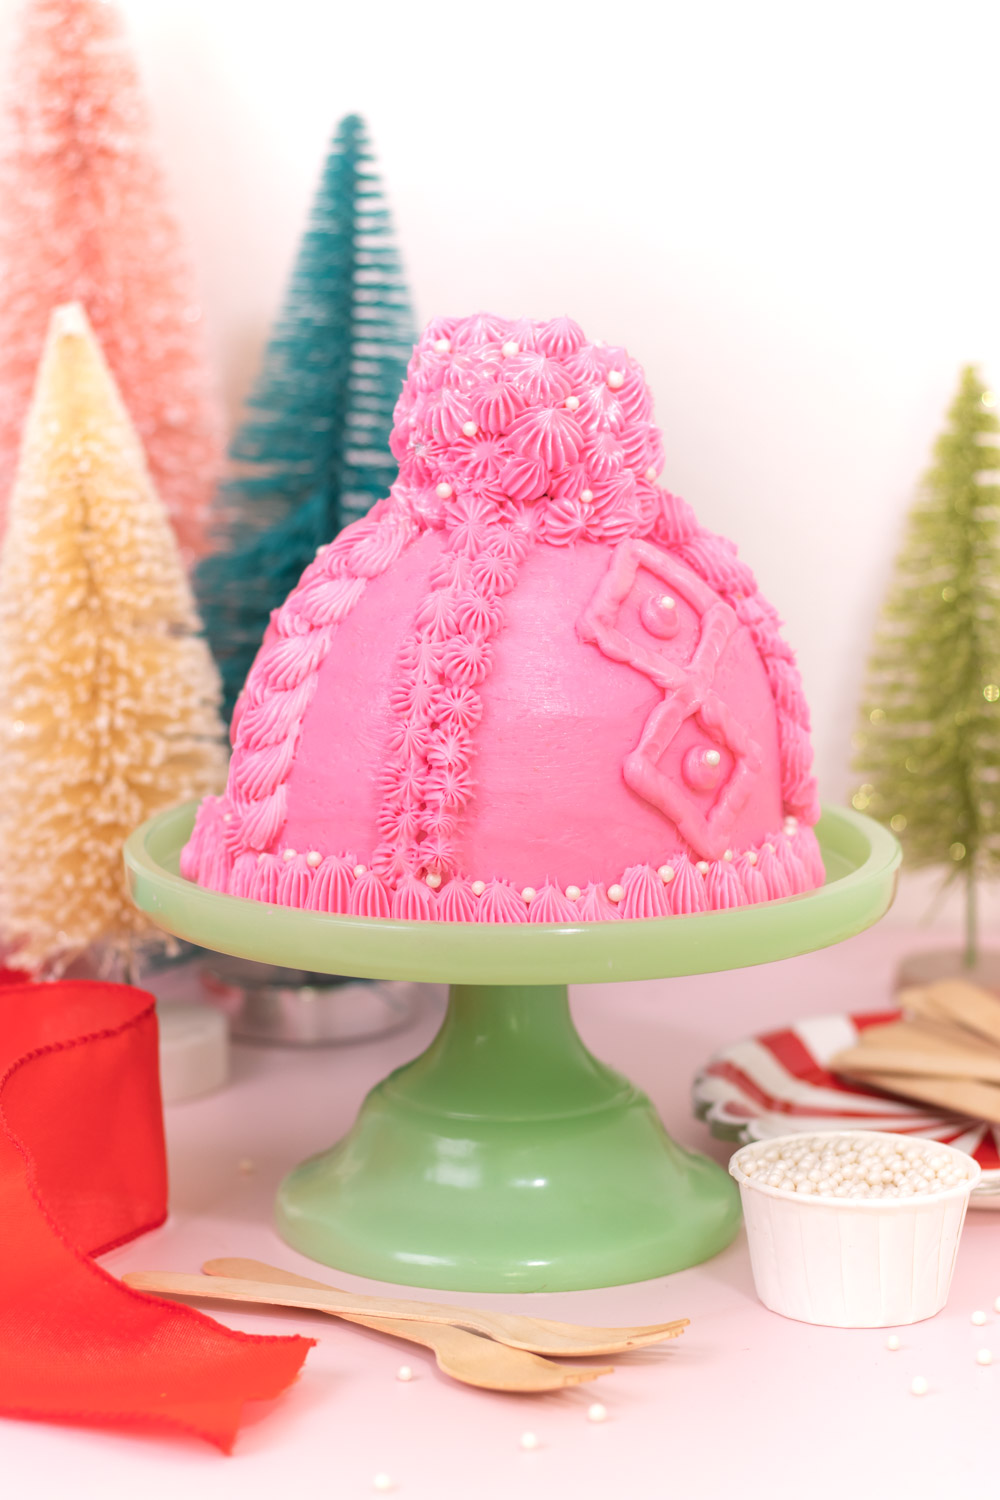 knit beanie cake on cake stand in front of christmas trees